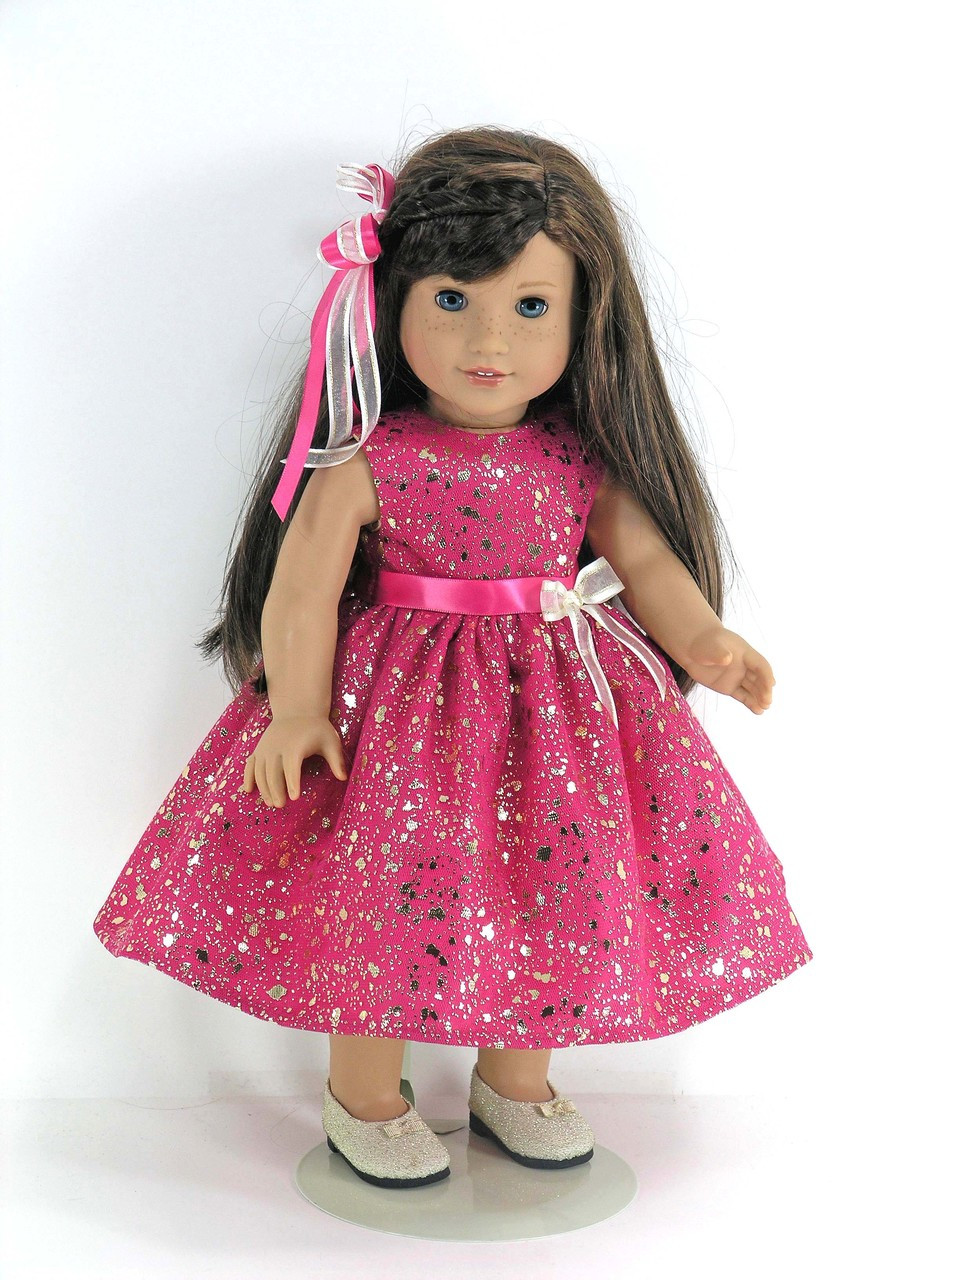 Doll Clothes Handmade for American Girl - Dress, Headband, Pantaloons - Pink,  Gold Lace and Taffeta - Exclusively Linda Doll Clothes